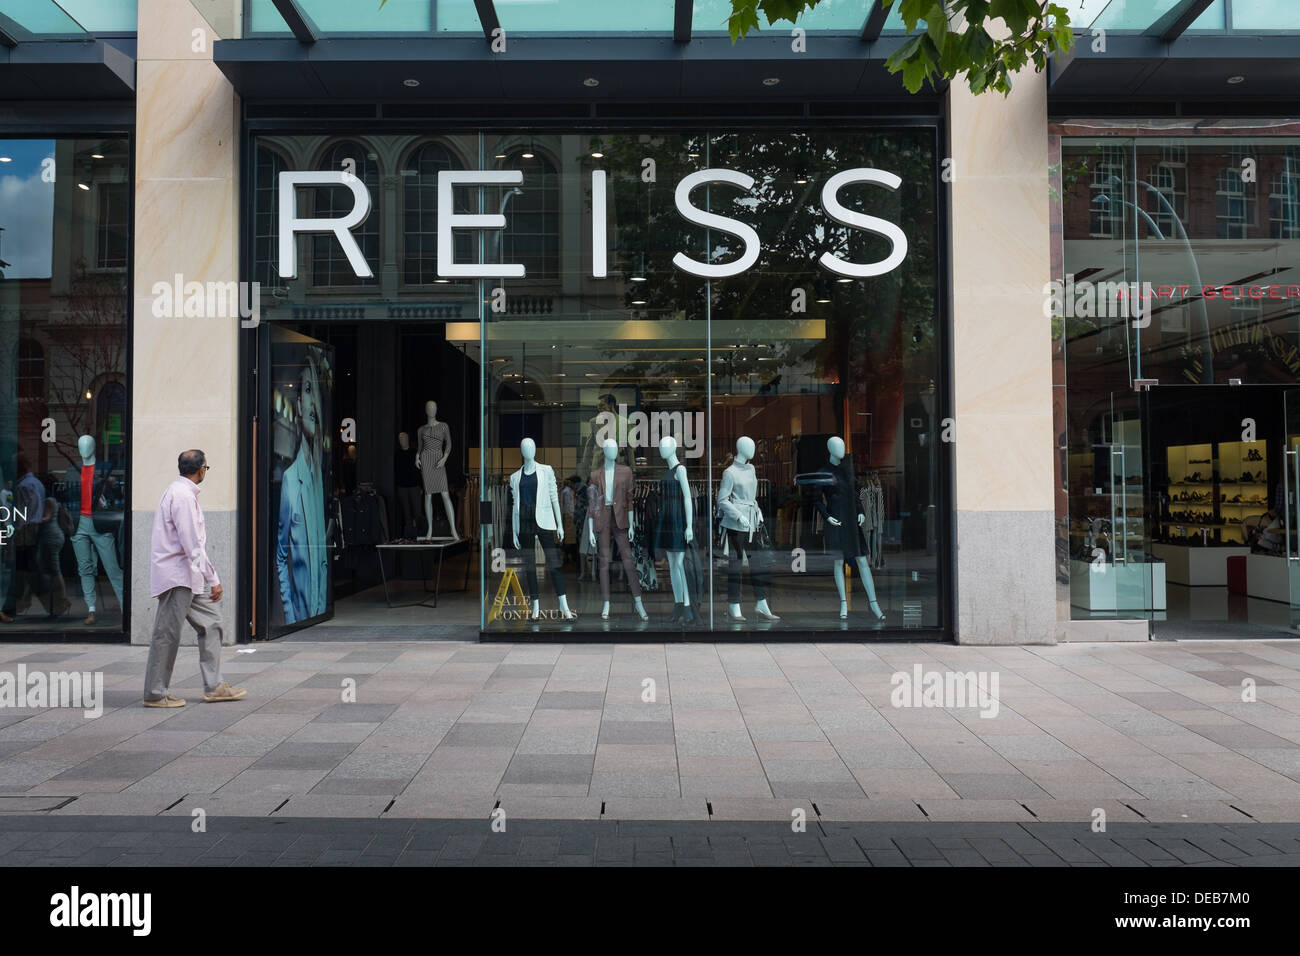 Reiss clothing store, Cardiff city centre, August 2013, Wales UK Stock Photo